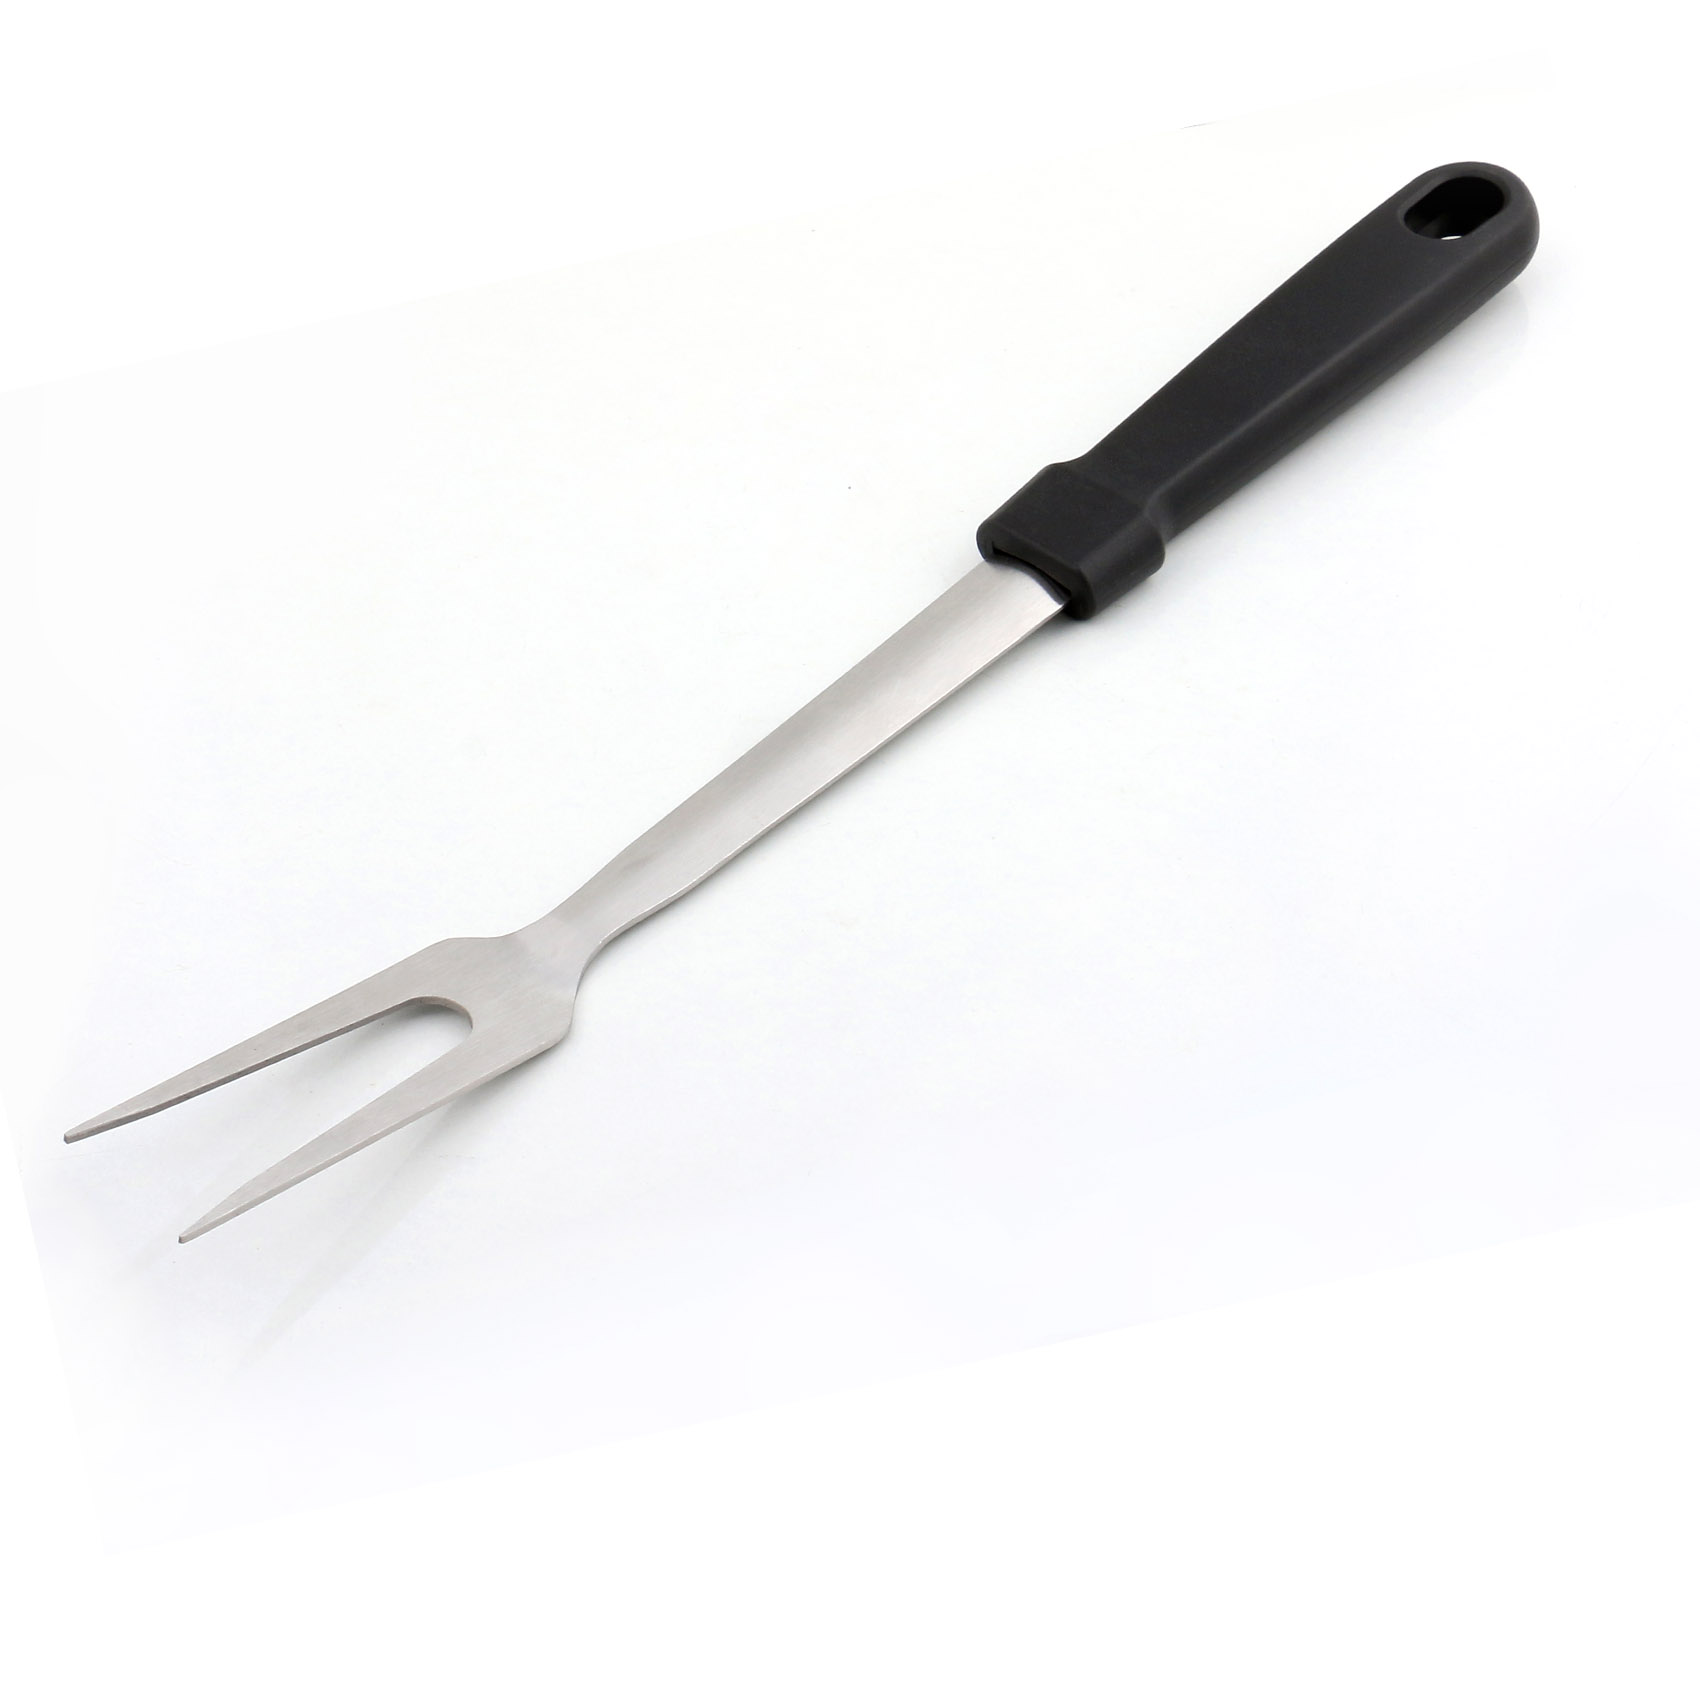 CAMPMATE BBQ fork 38.5CM CM-F385 | CAMPING TOOL | BARBEQUE CHICKEN